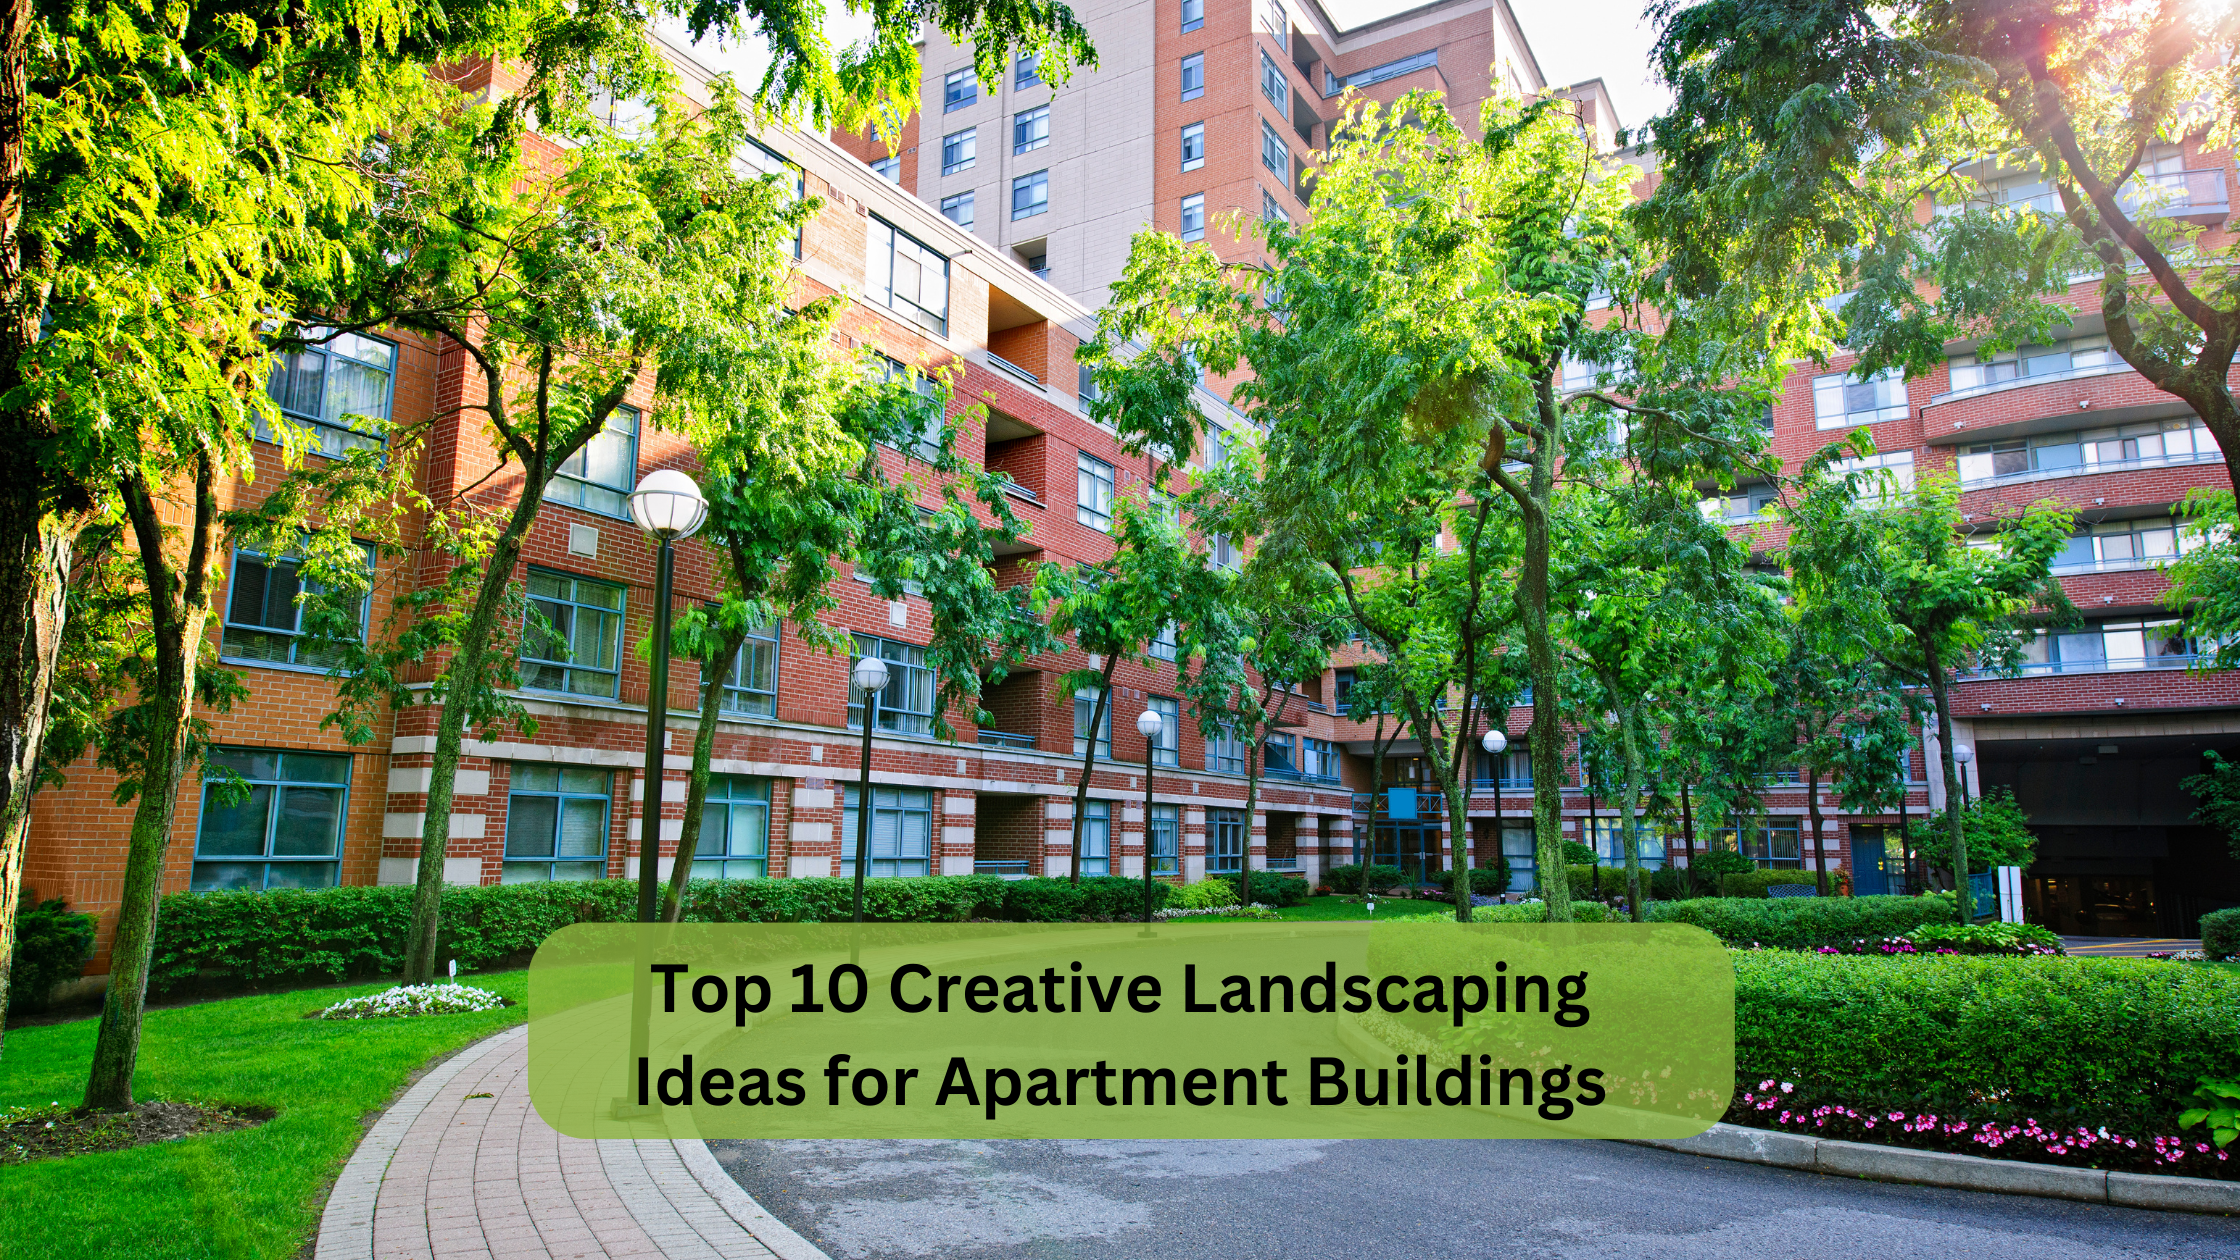 Top 10 Creative Landscaping Ideas for Apartment Buildings